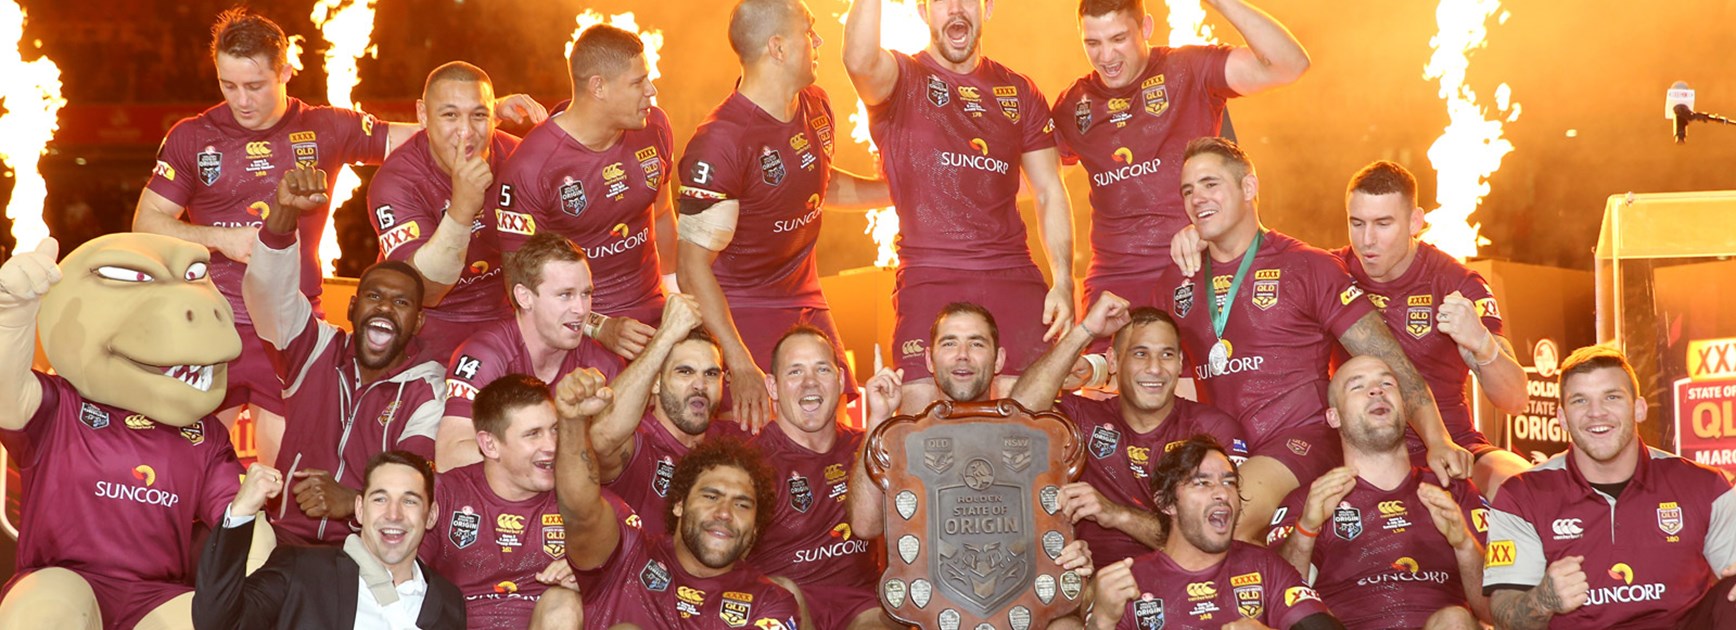 Queensland players celebrate on stage following their record-breaking win in Origin III.